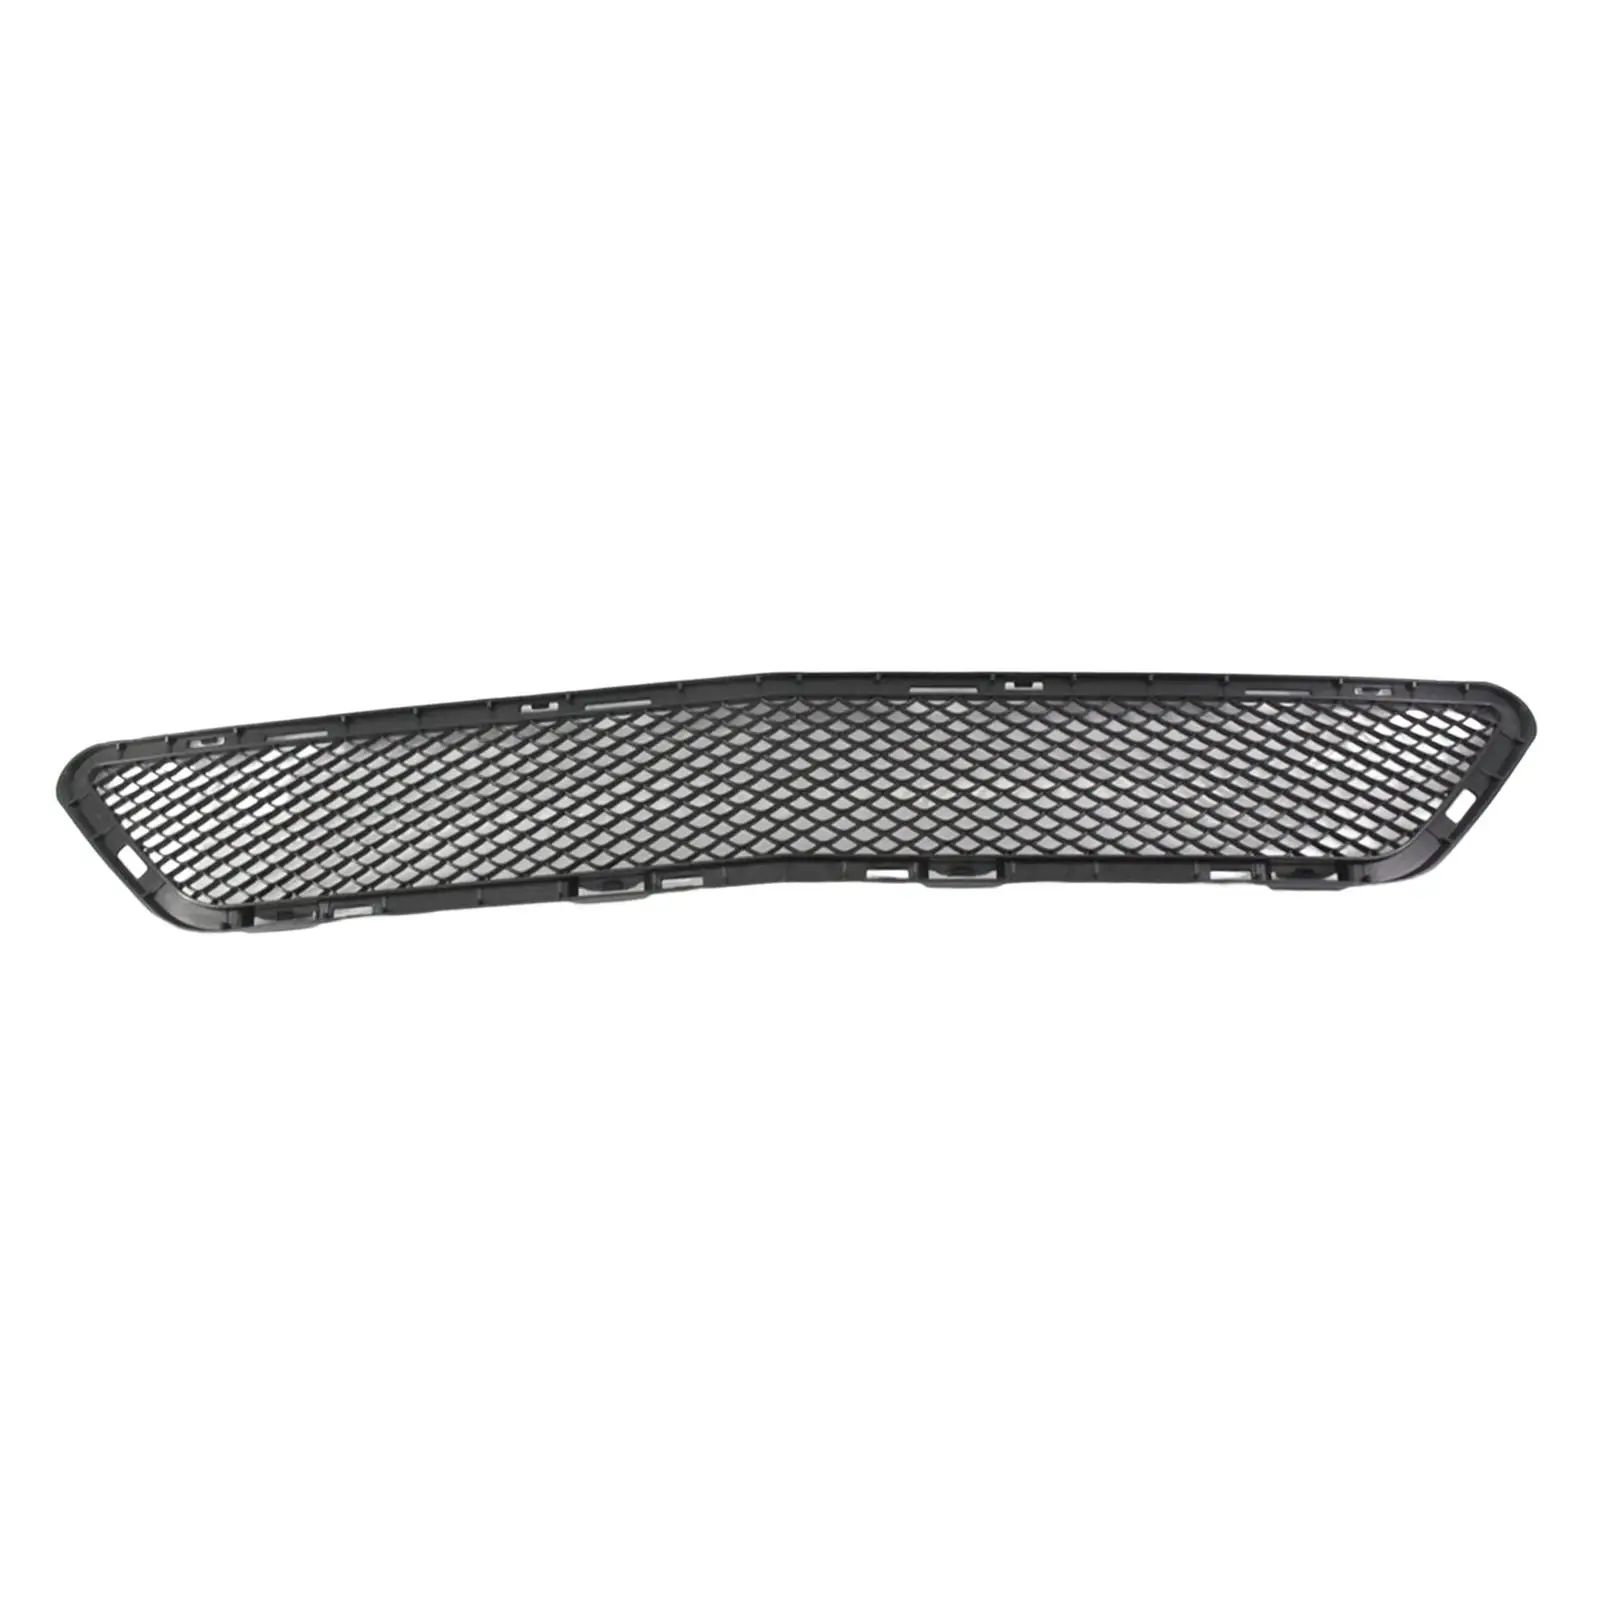 Front bumpers Lower Grill Grille Front bumpers Lower Center Grill Cover for x204 Facelift